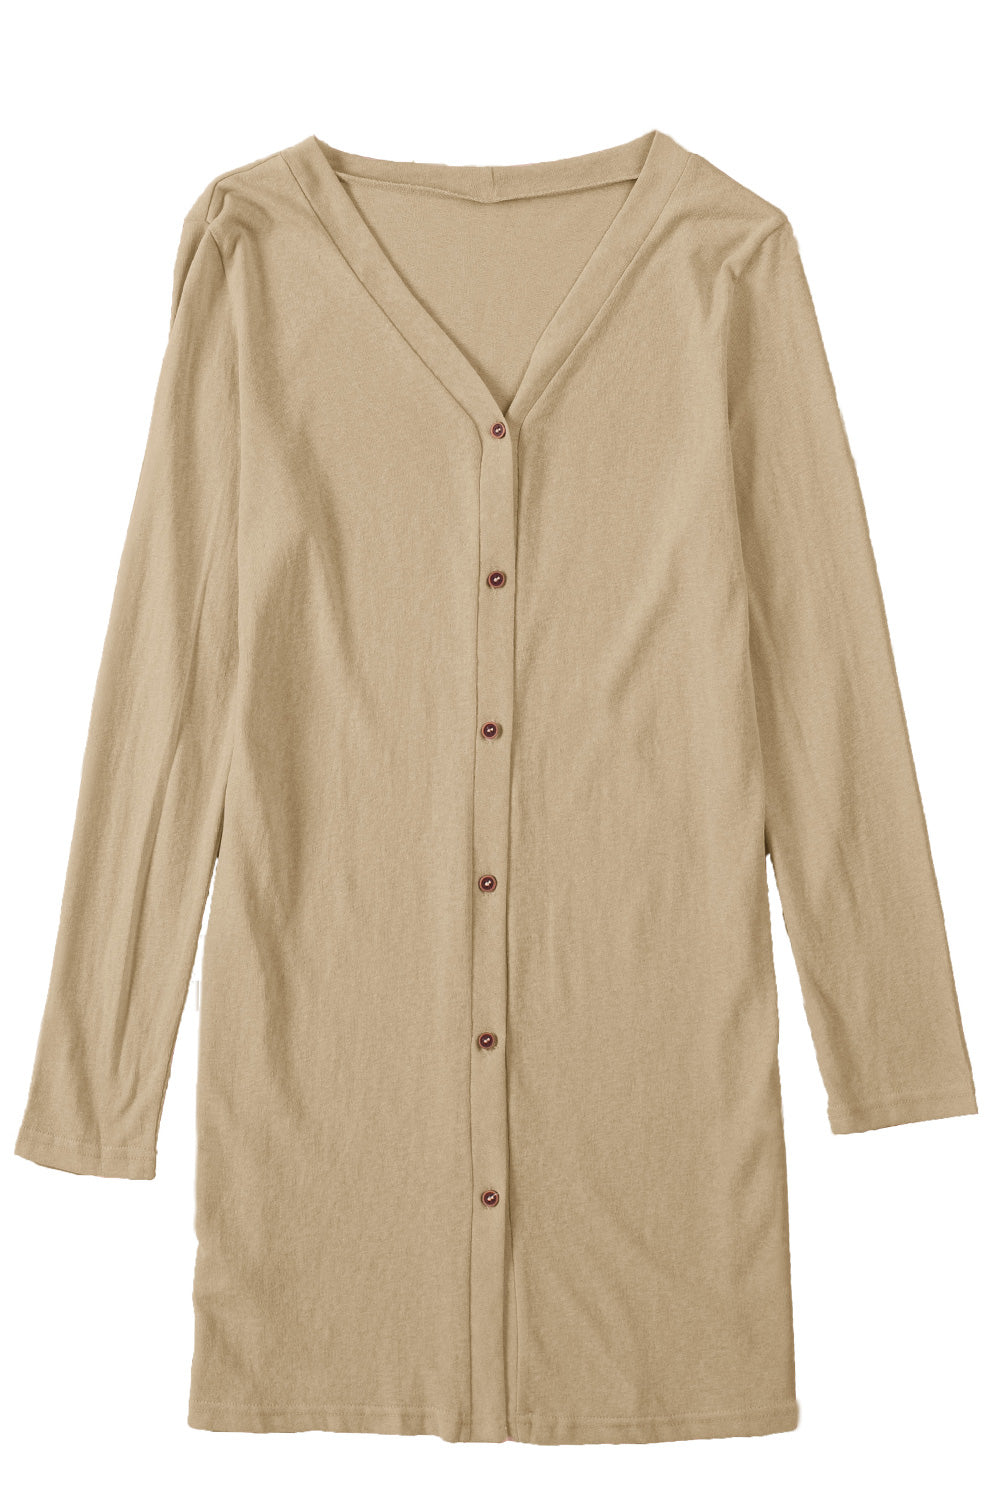 White Solid Button Up V Neck Long Cover Up